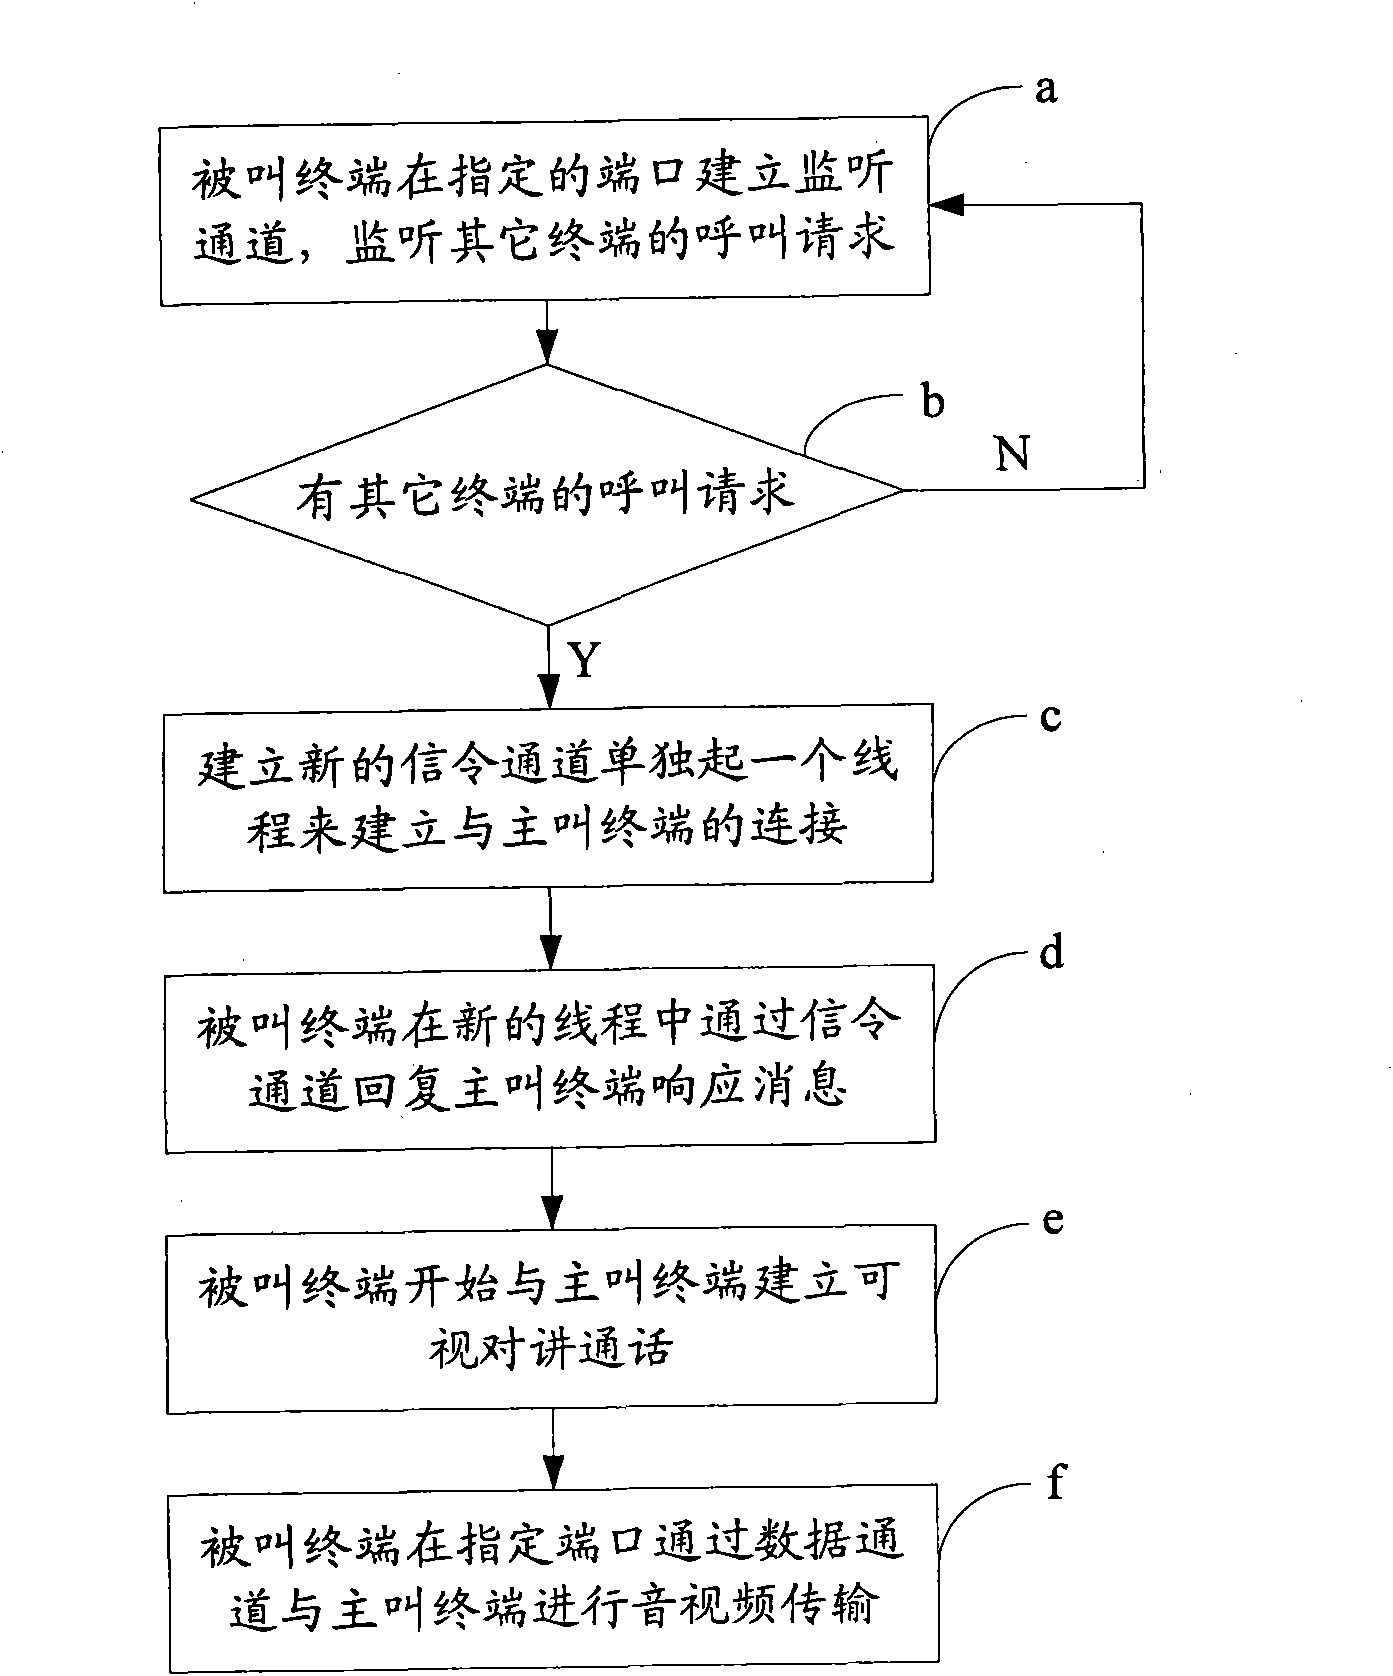 Intercommunication system and call processing method thereof for multiple calling terminals